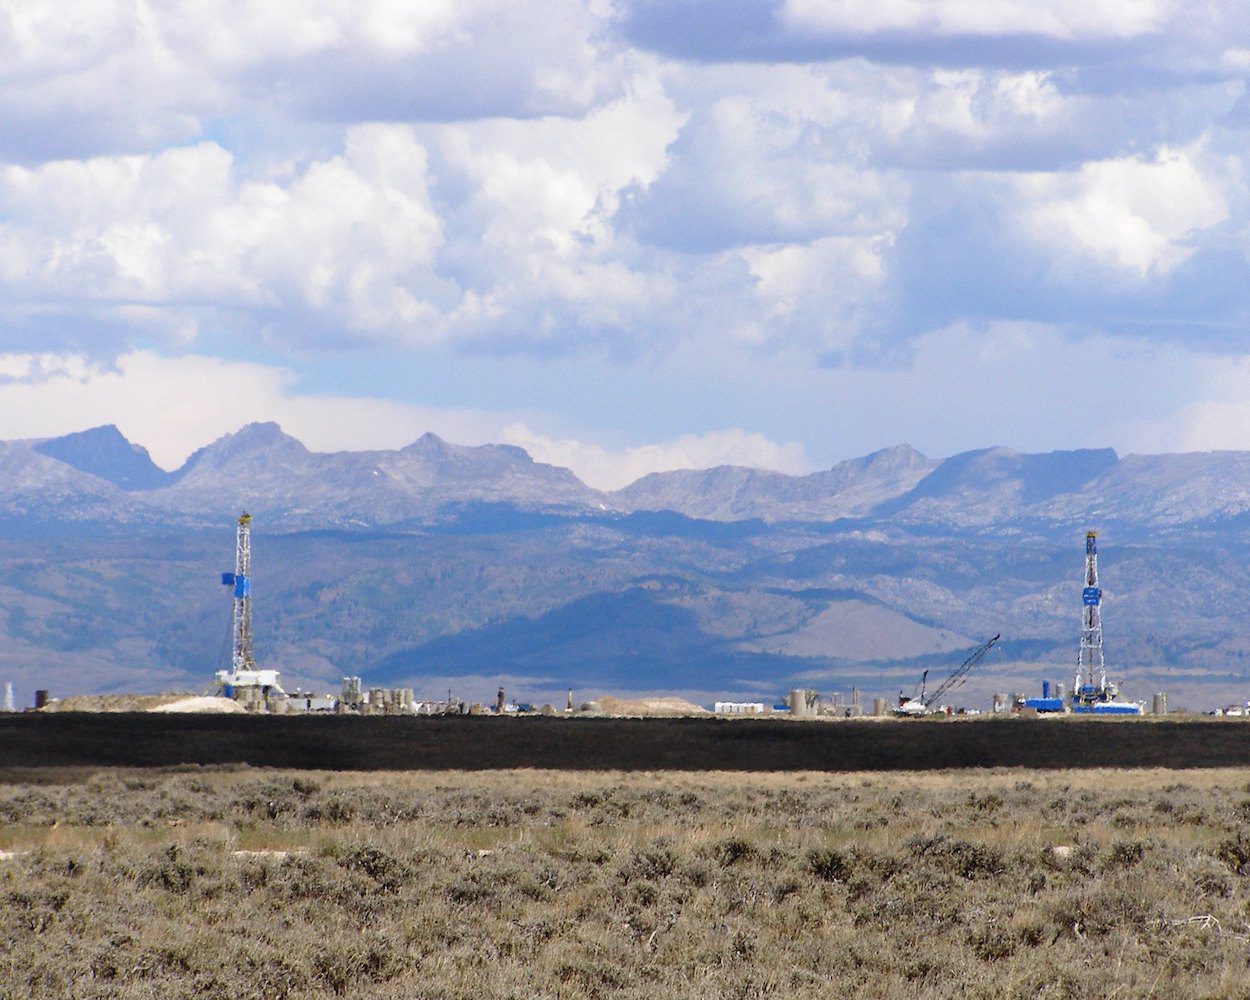 An oil and gas lease in the Wind River Range of Wyoming